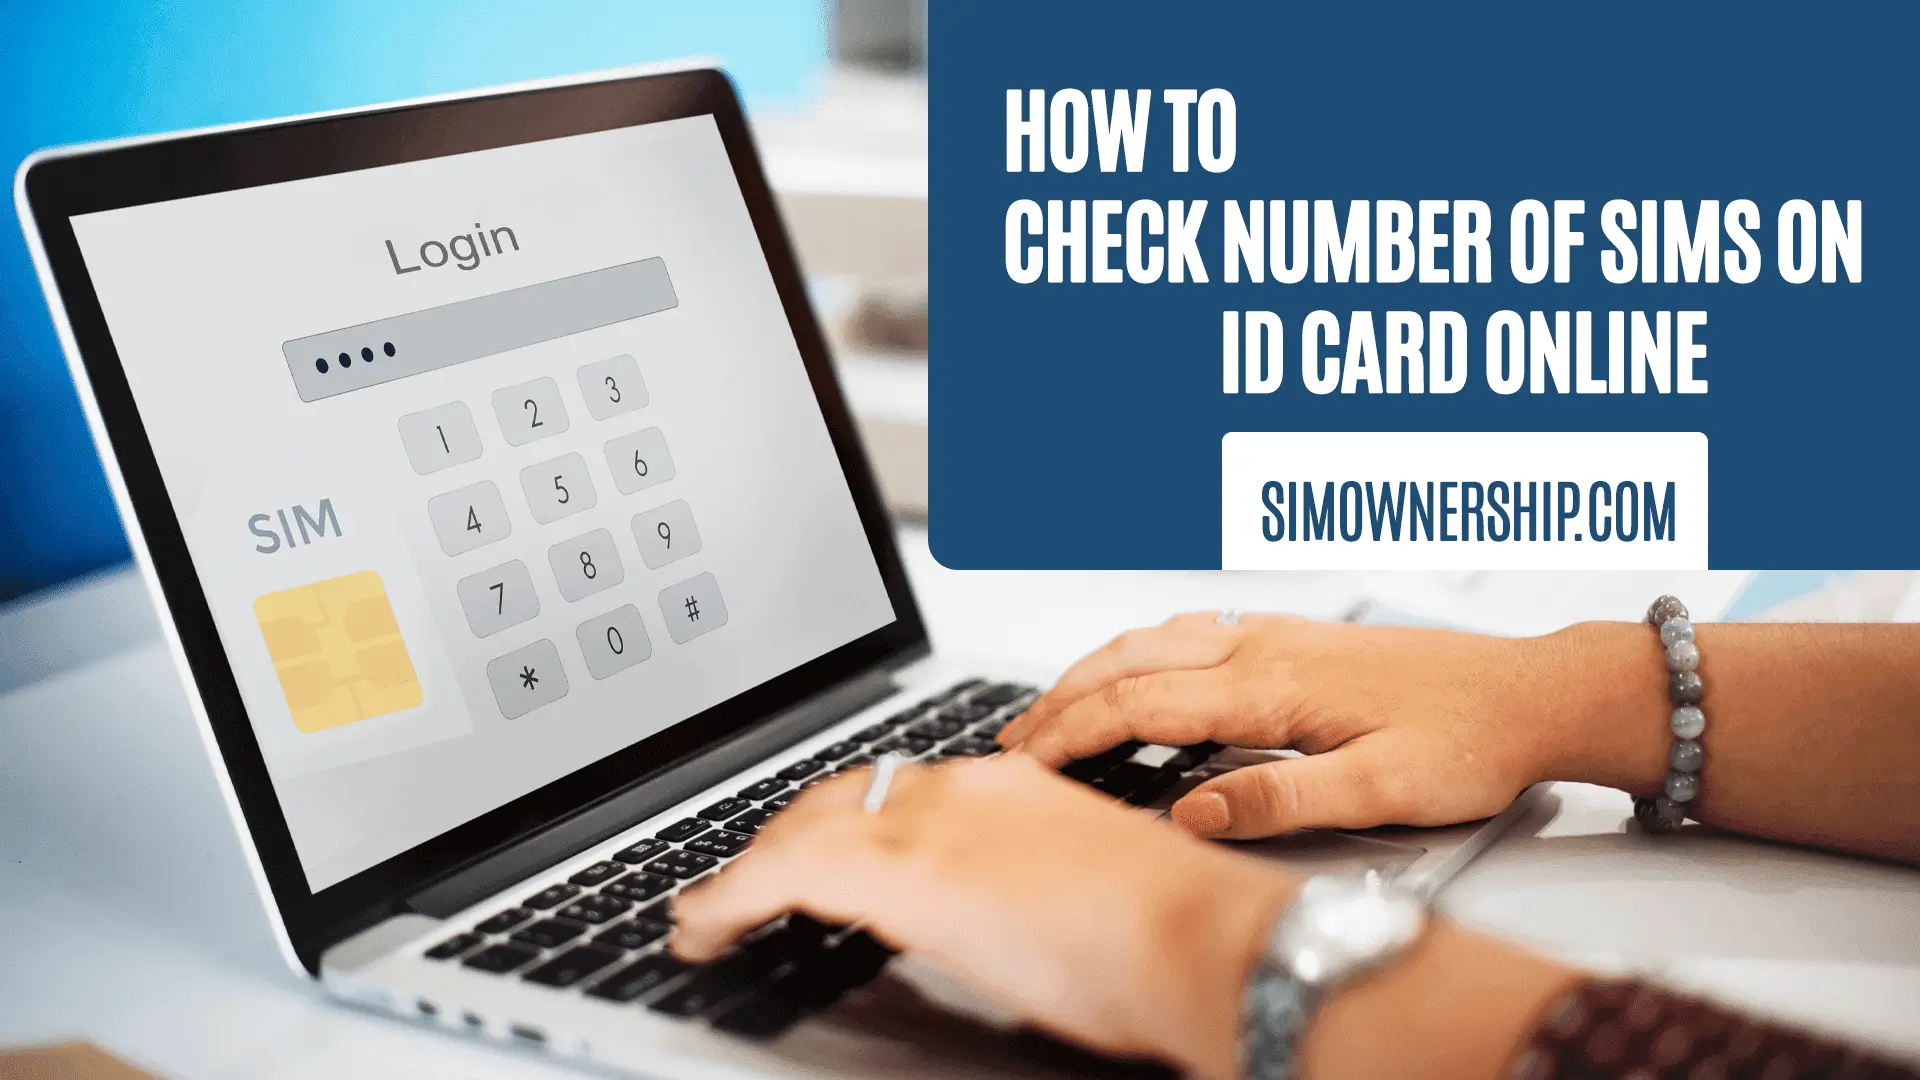 How to Check Number of SIMs on ID Card Online